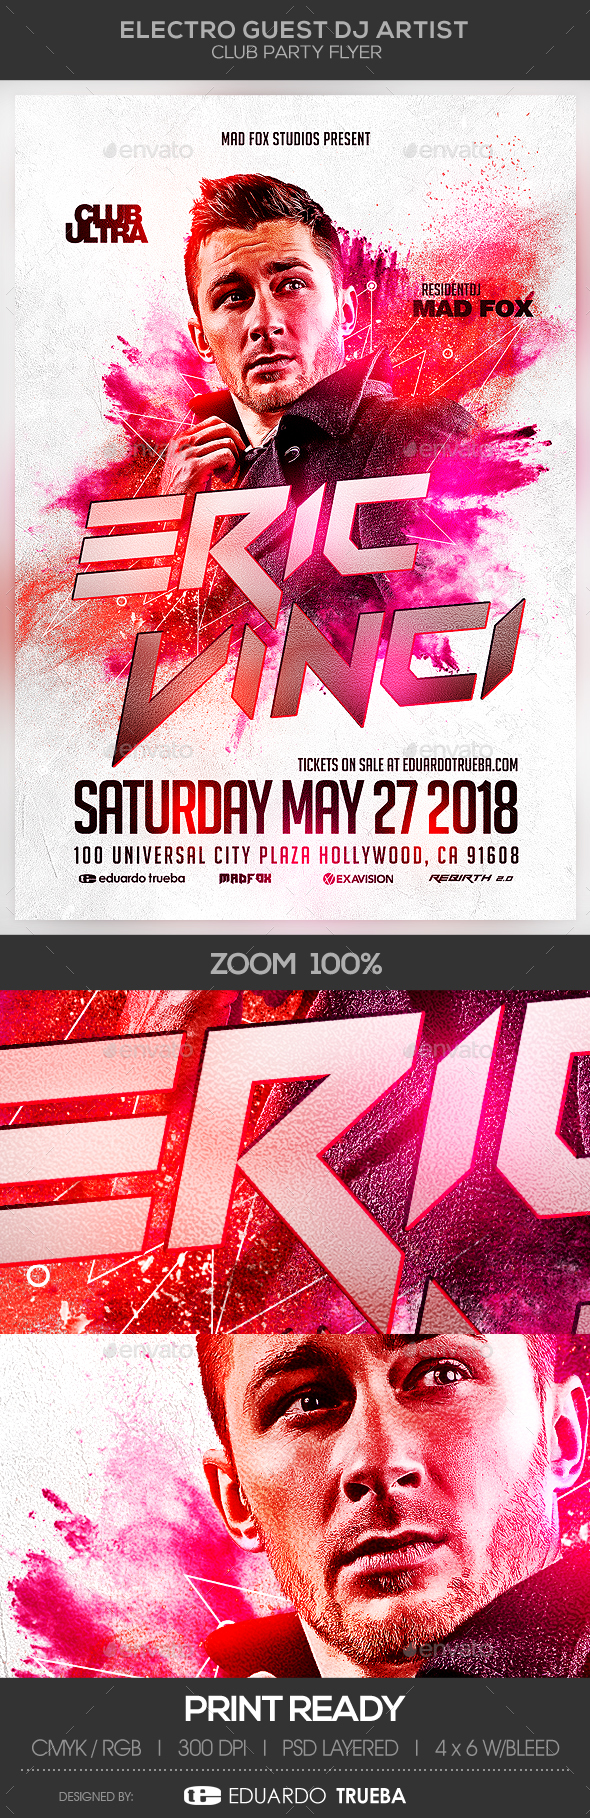 GraphicRiver Electro Guest Dj Artist Club Party Flyer 20939003